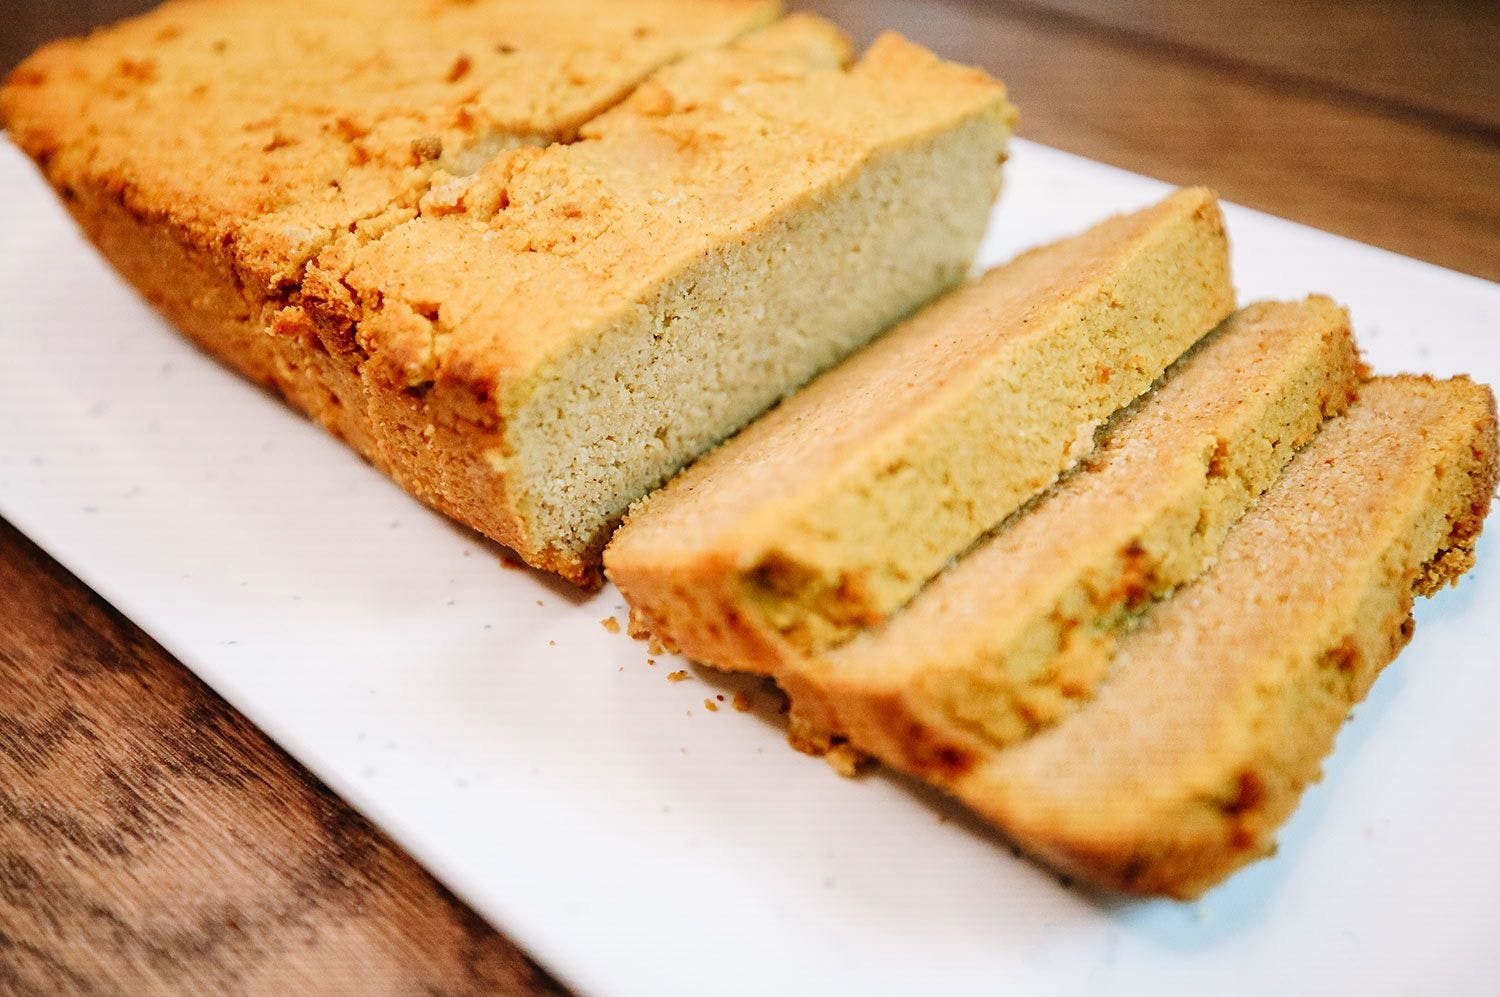 The Holly Furtick recipe: 'Low Carb Pumpkin Bread'